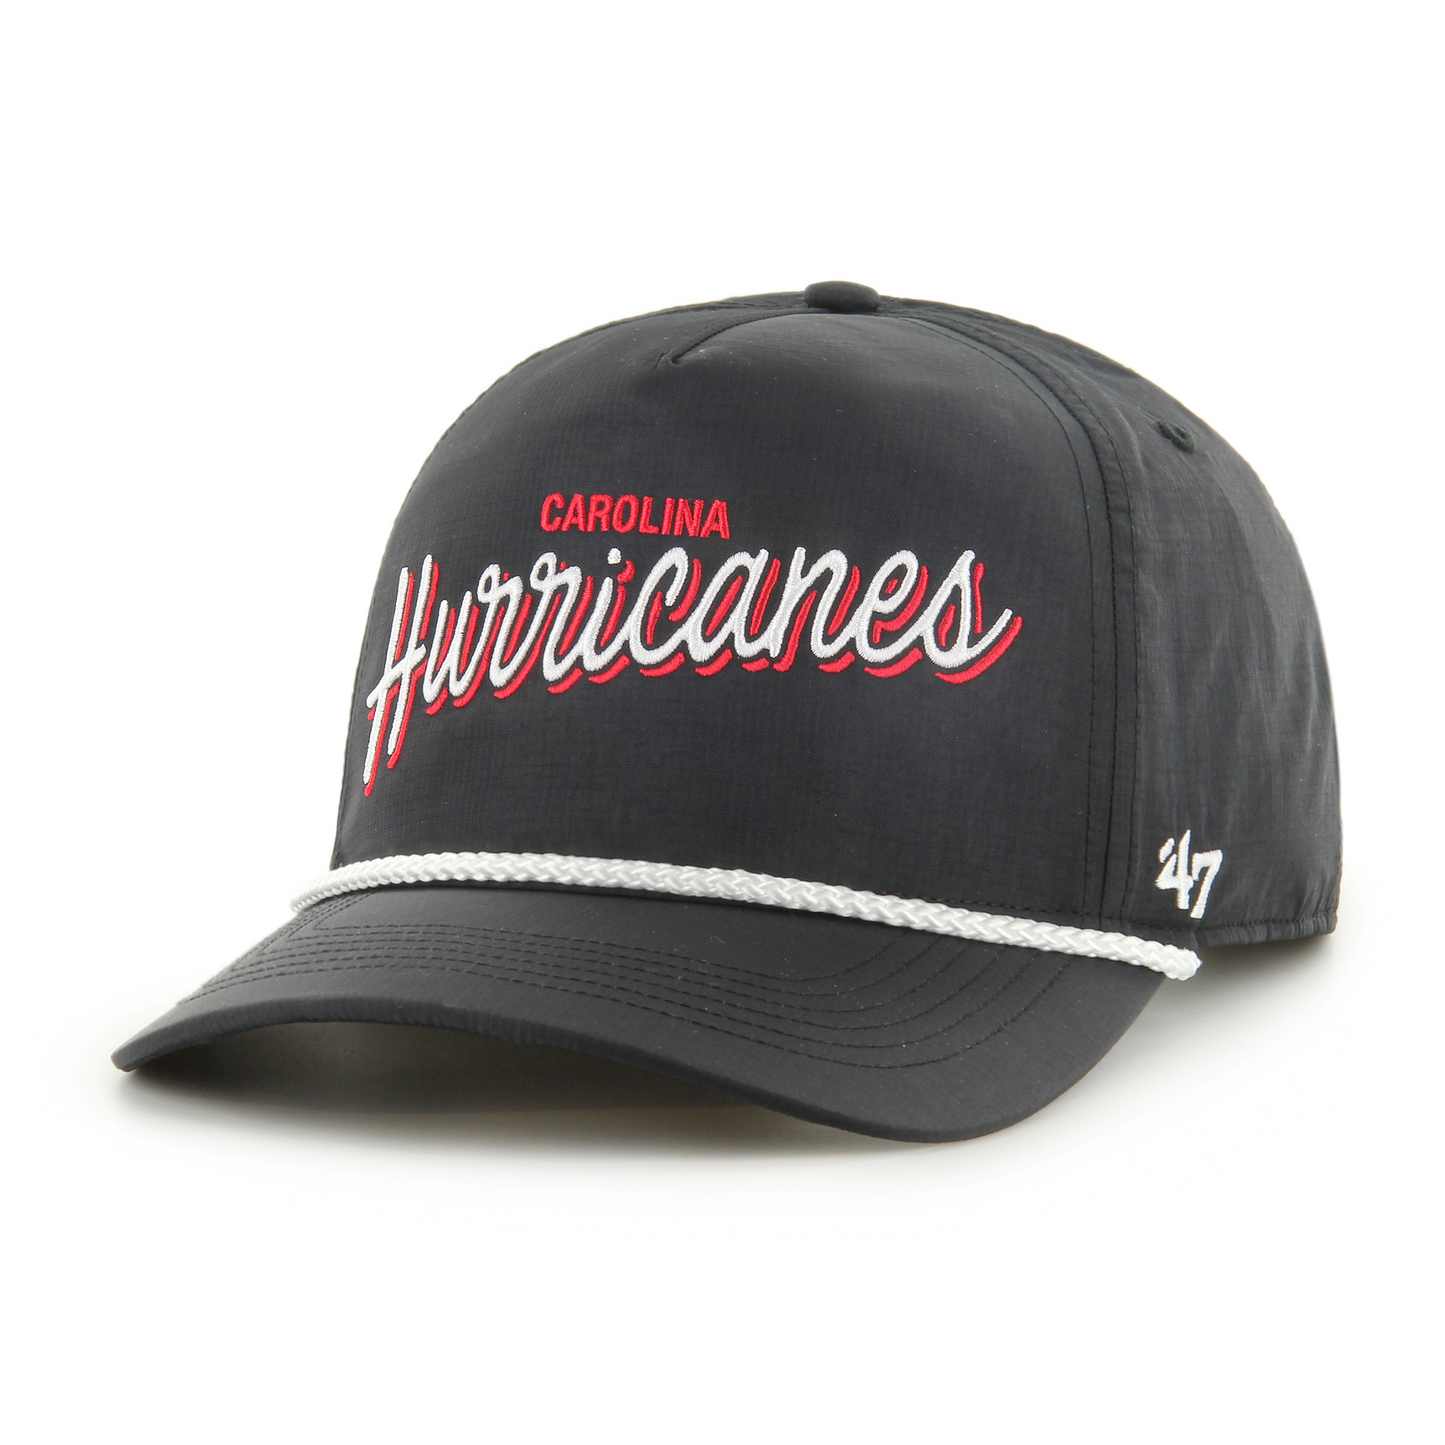 Front: Black baseball cap with white rope and Carolina in red print and Hurricanes in larger font script